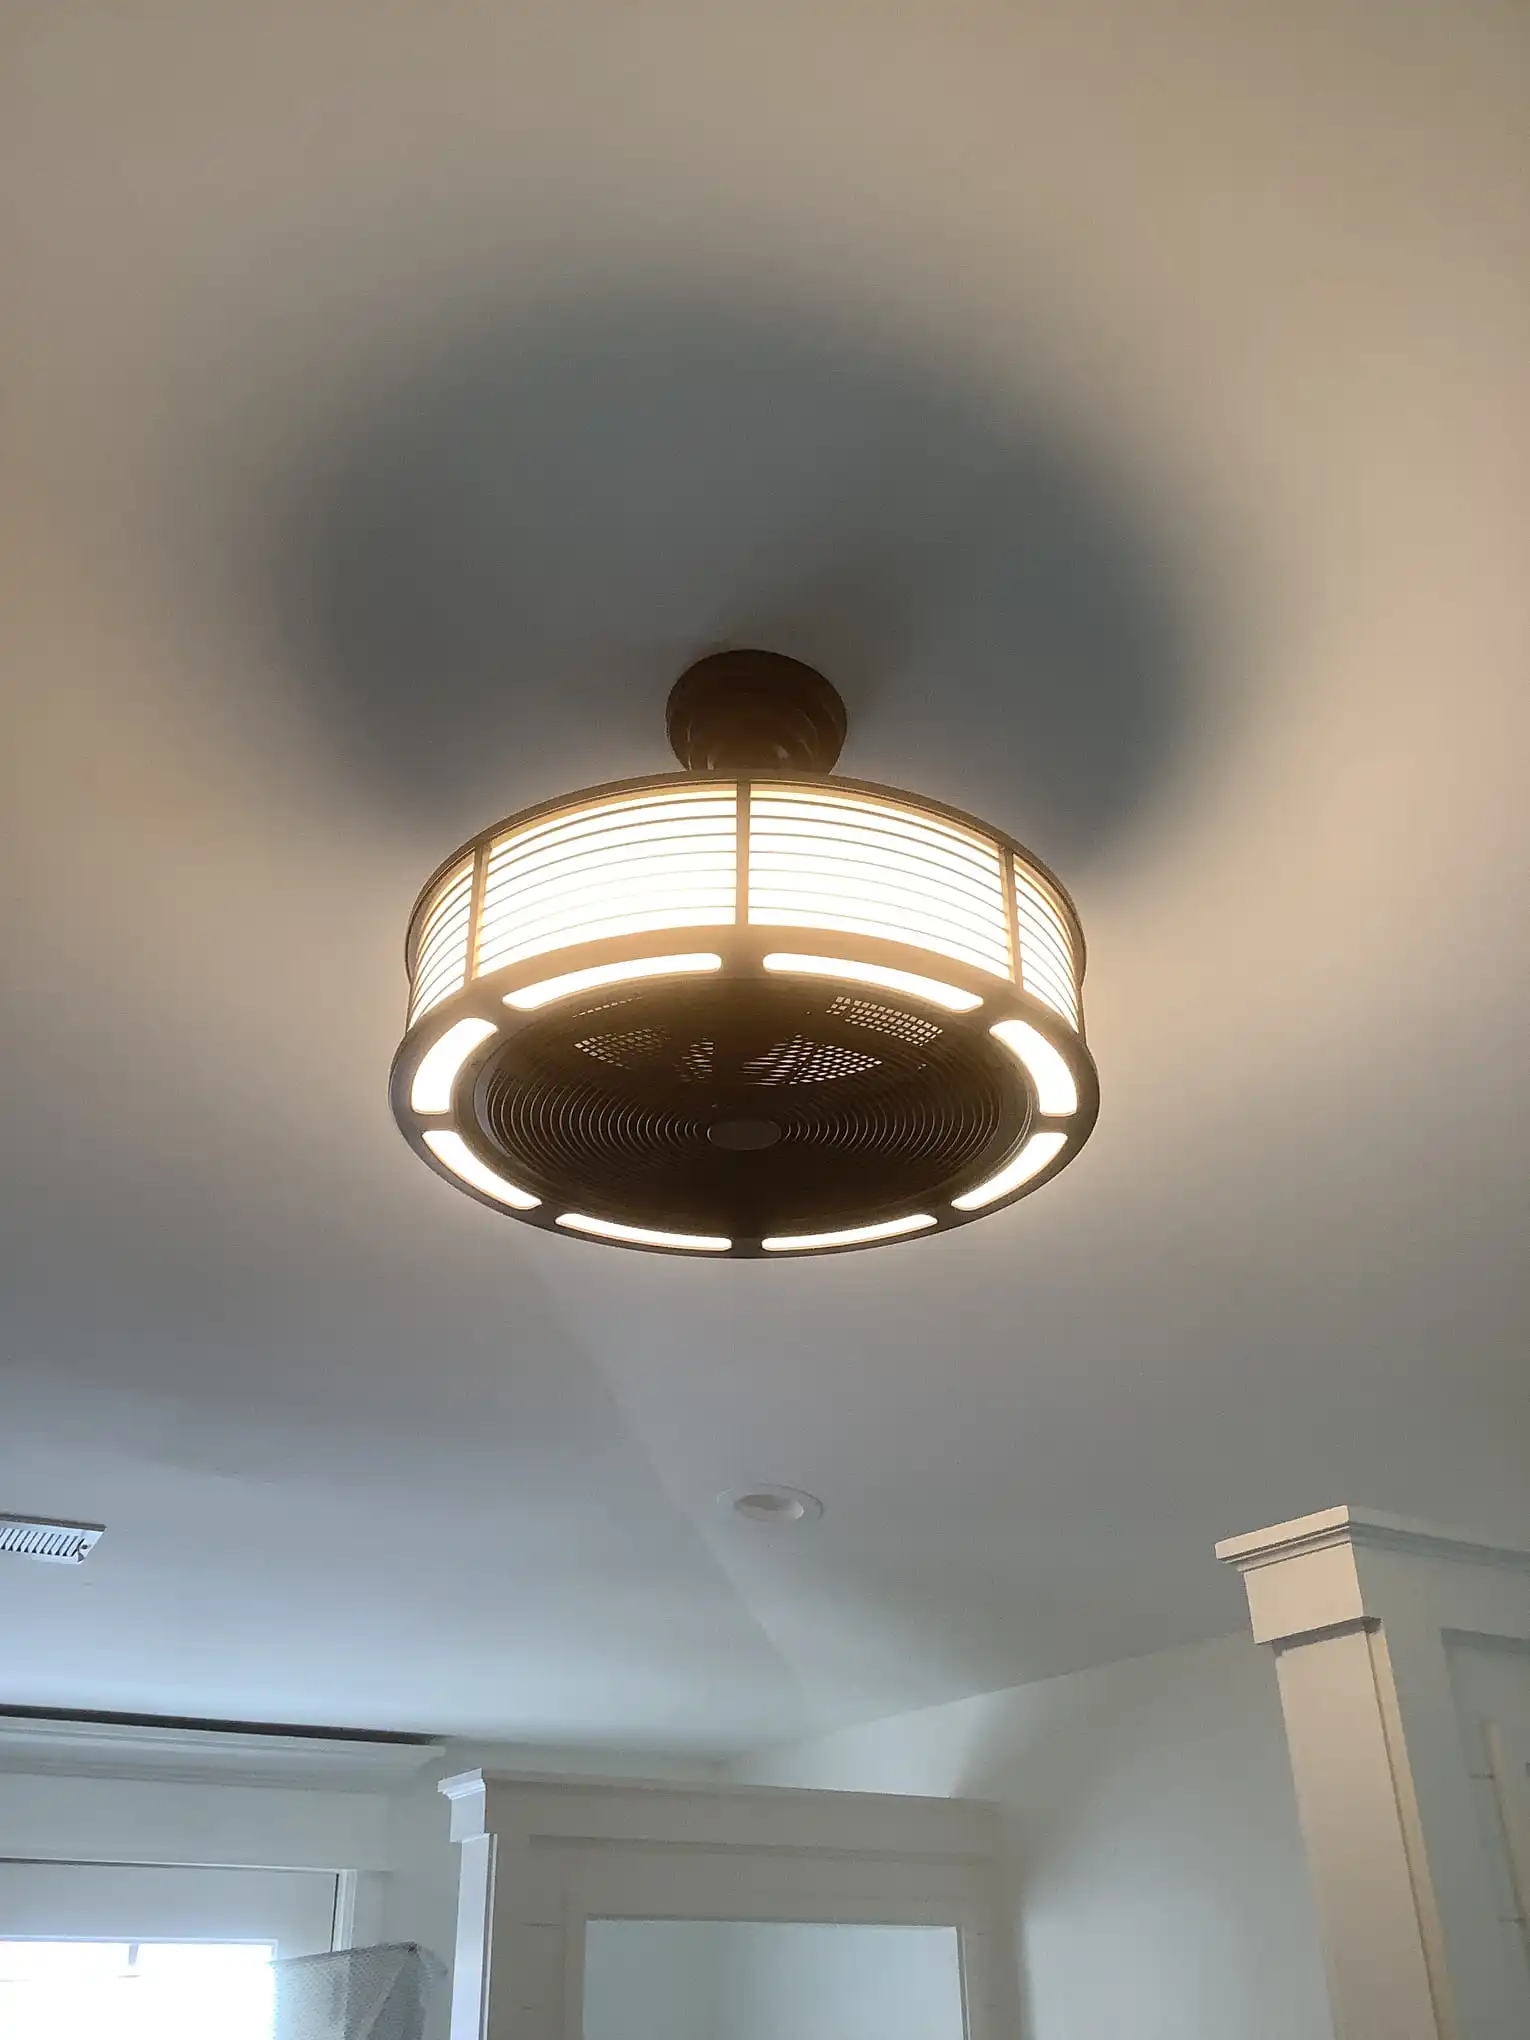 A new ceiling fan installed by Mr. Handyman with a ring of lights around its edge and a wire mesh covering the fan blades.